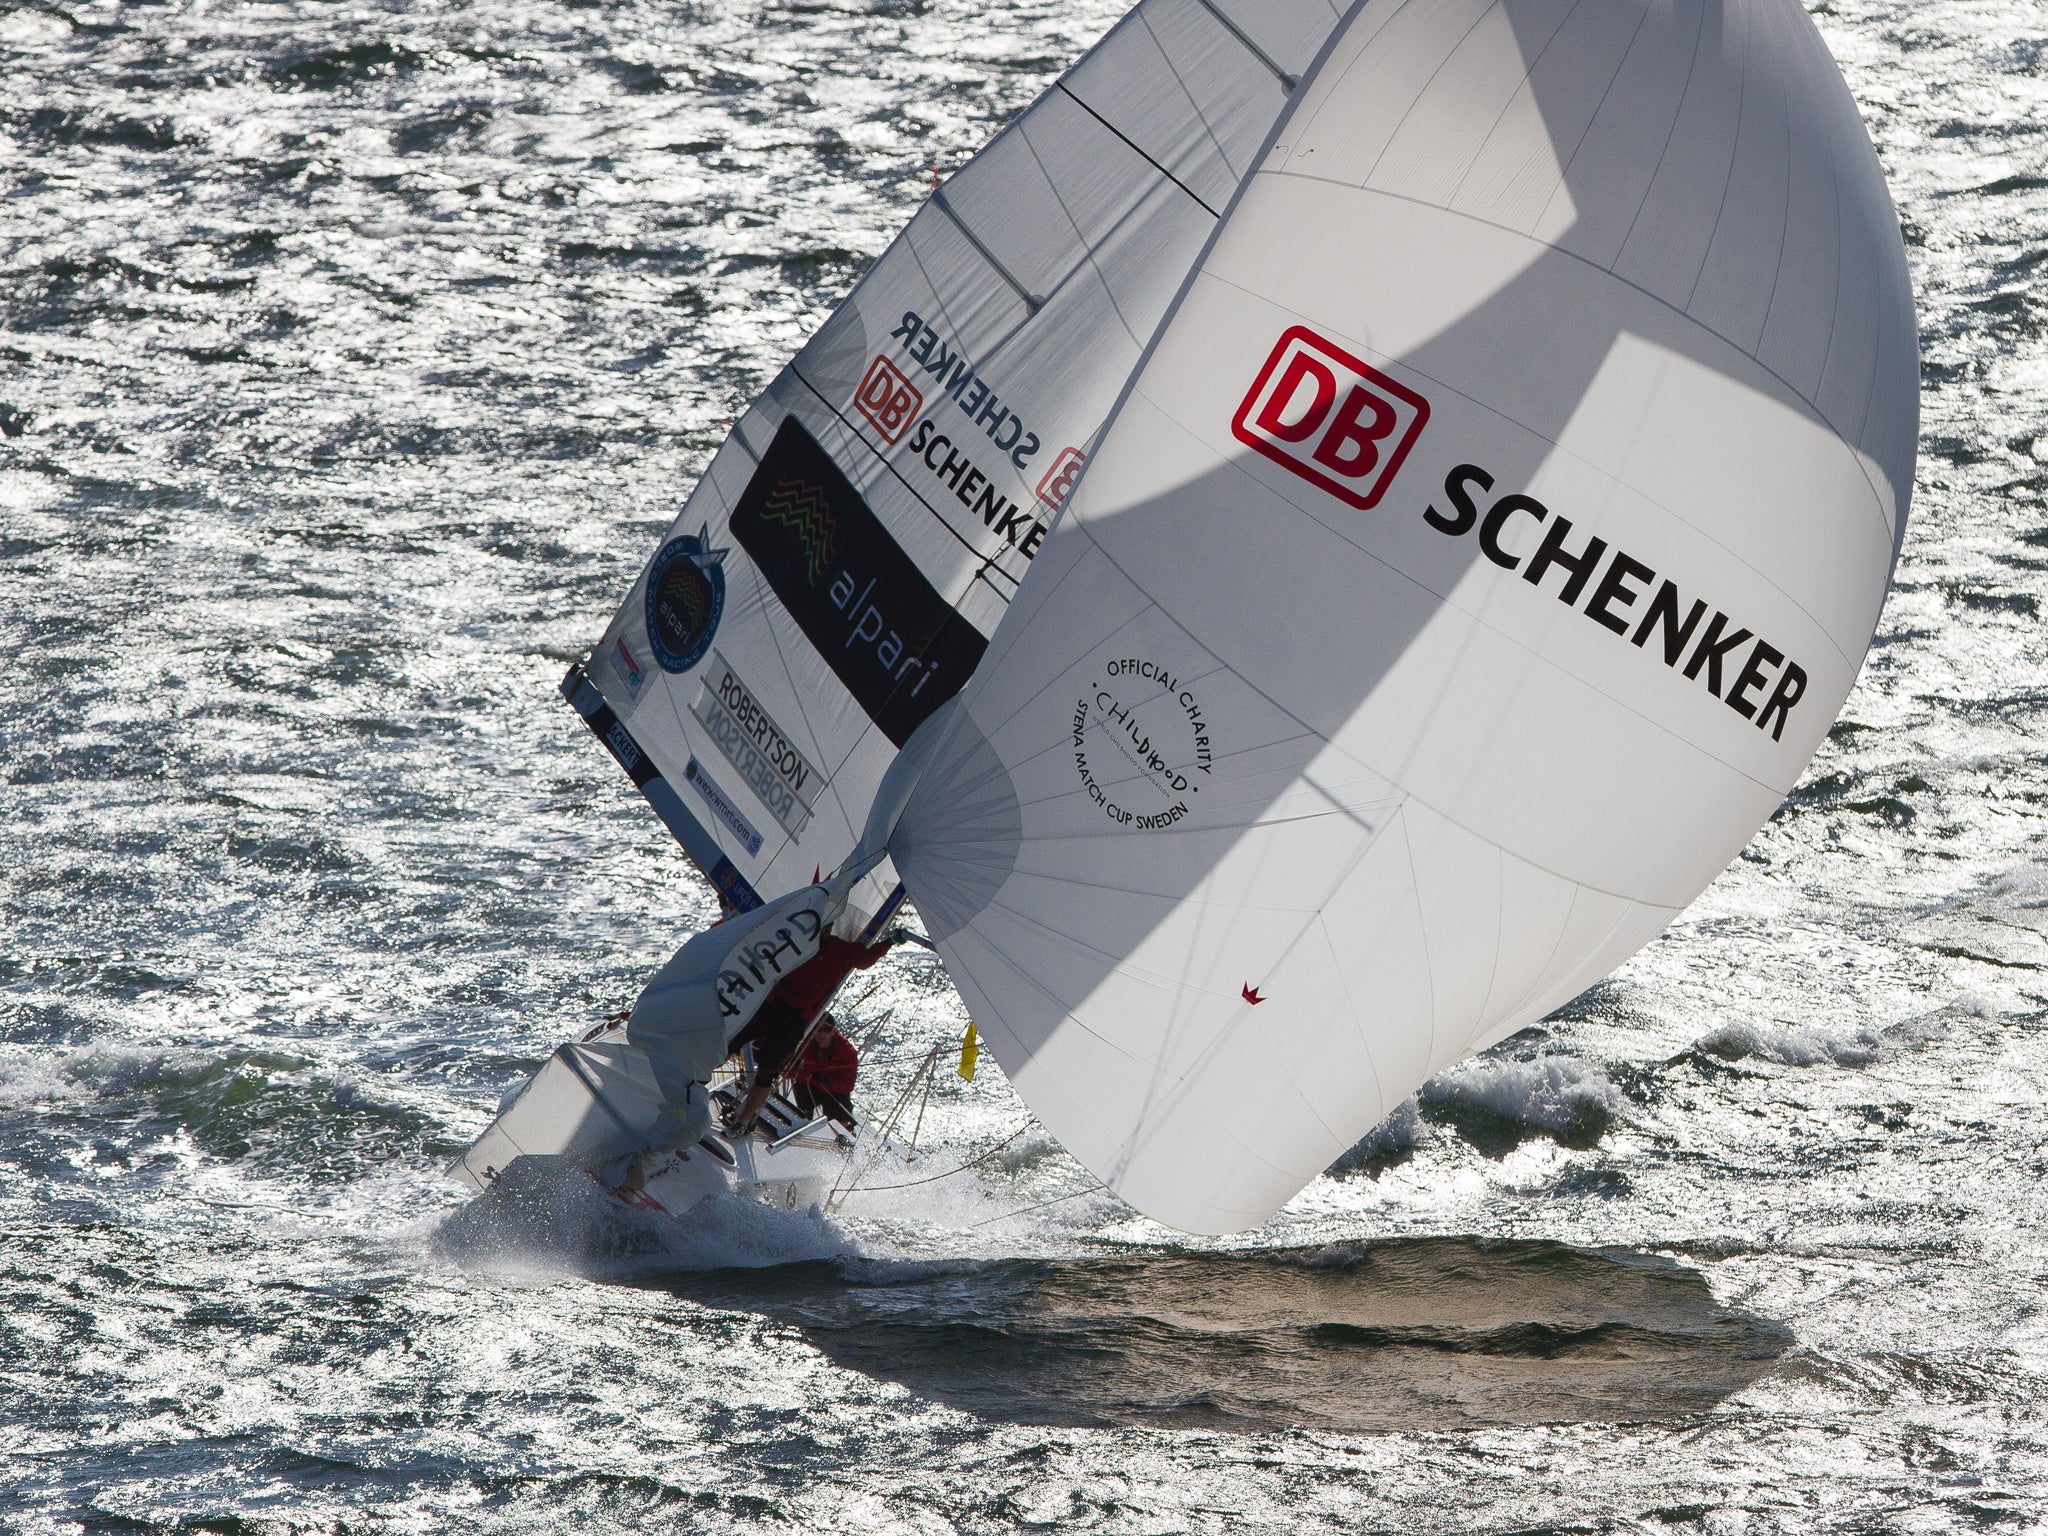 It was a rock and roll day for Kiwi Phil Robertson as he powered his way to the final of the Stena Match Cup Sweden in the Alpari World Match Racing Tour at windy Marstrand